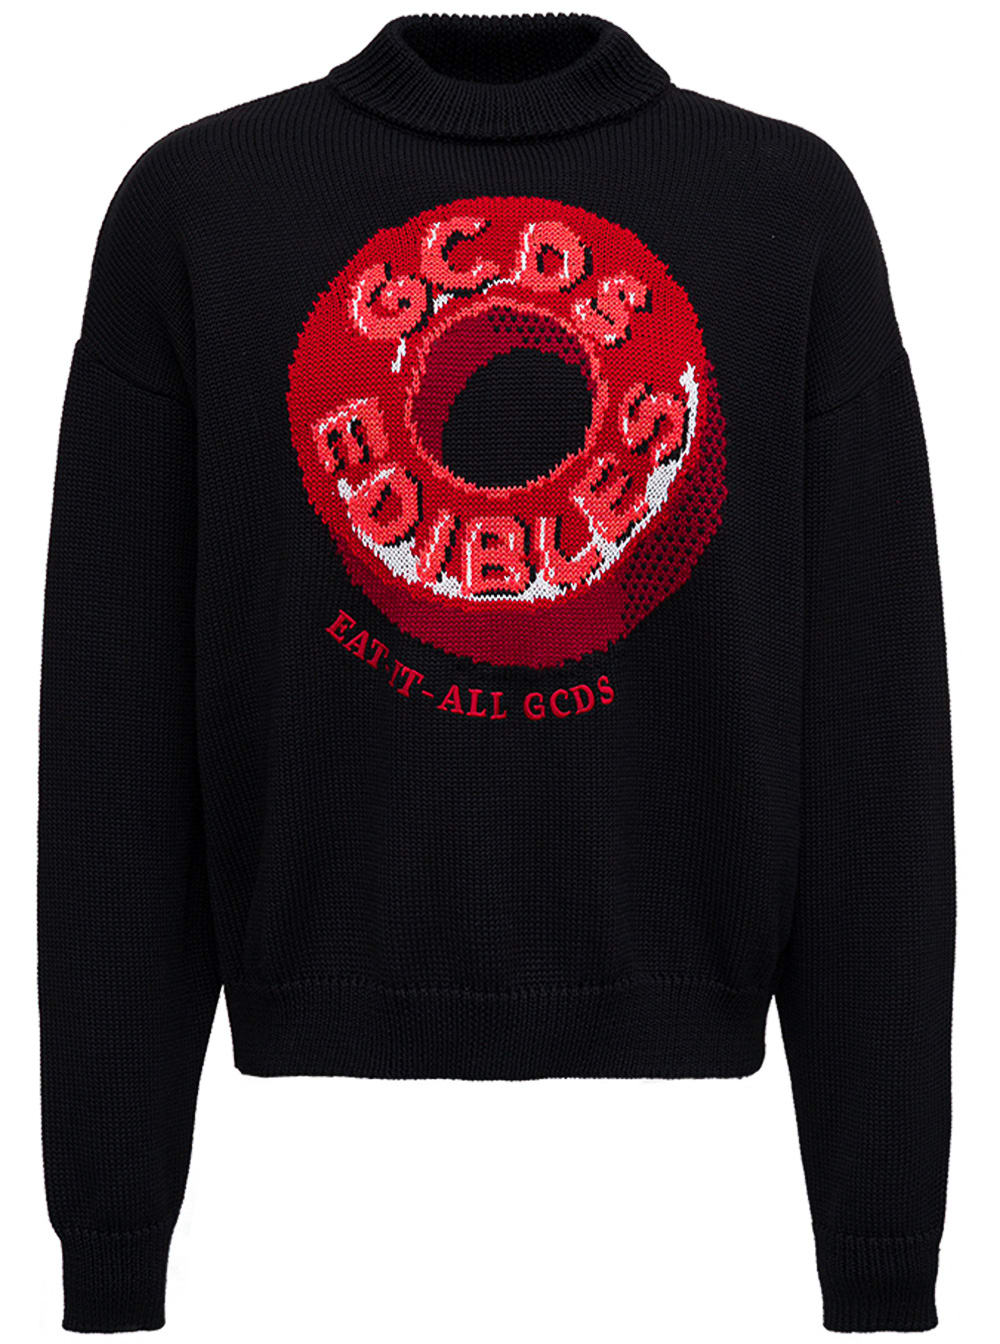 GCDS Black Sweater In Wool Blend With Candy Print